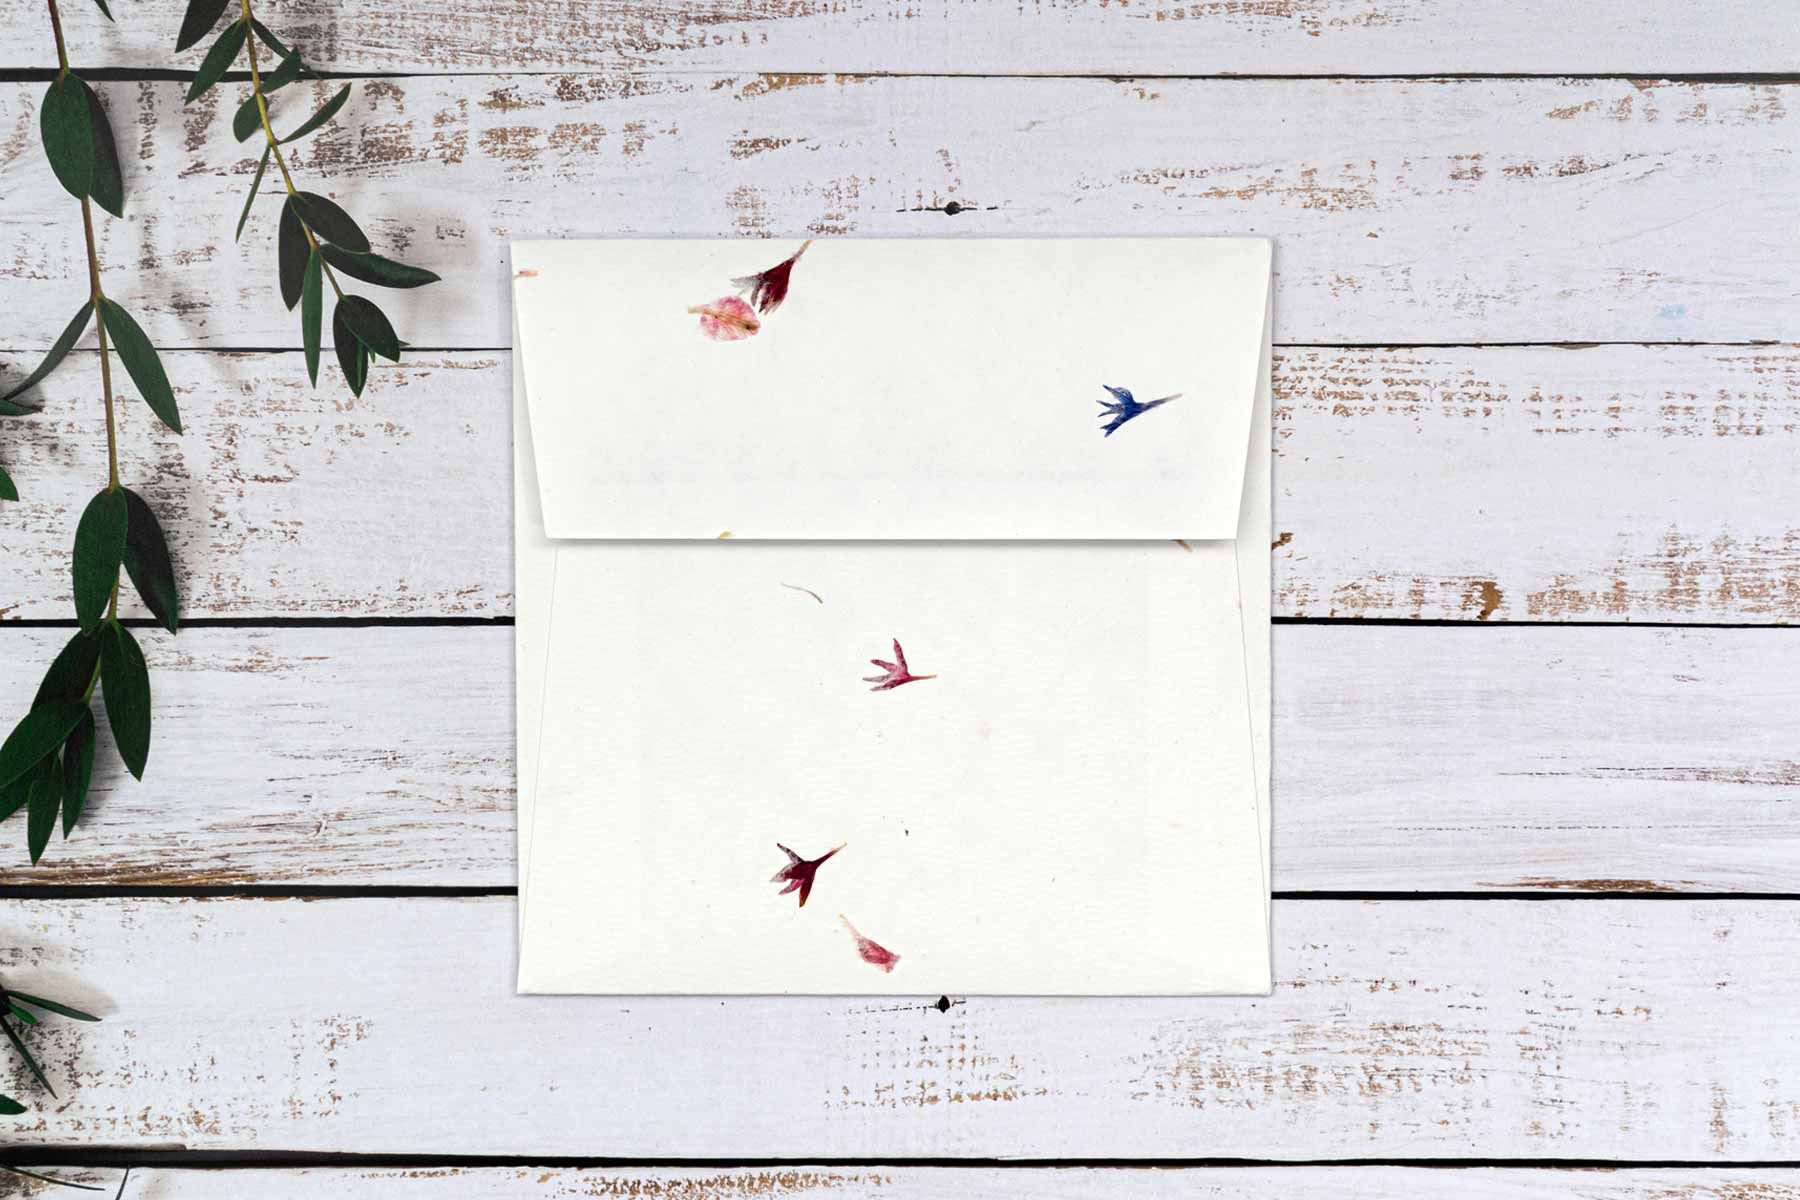 Petal paper envelope with peel and seal enclosure 150mm square size.